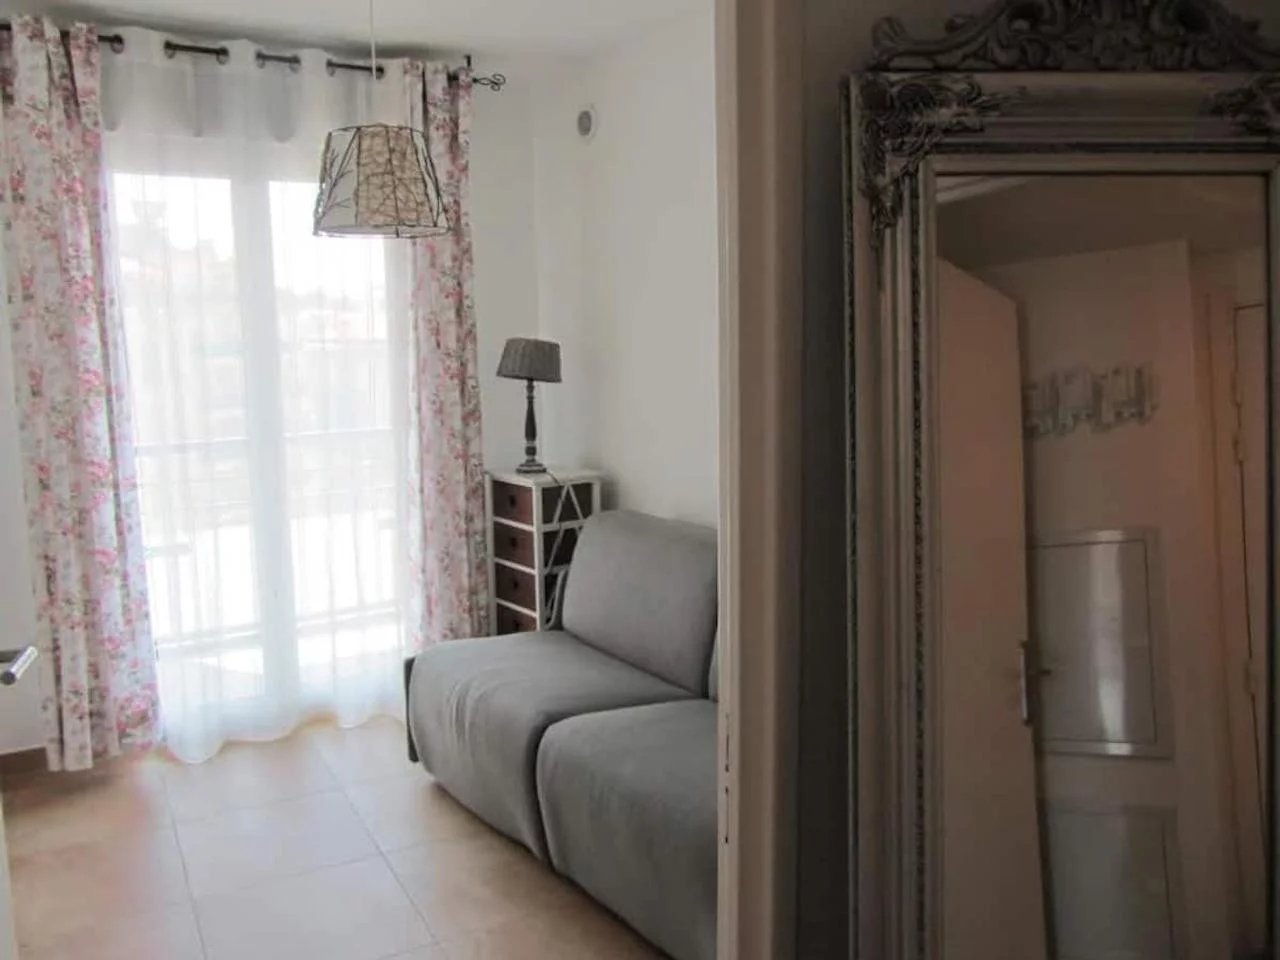 Appartement  3 Rooms 64.23m2  for sale   740 000 €